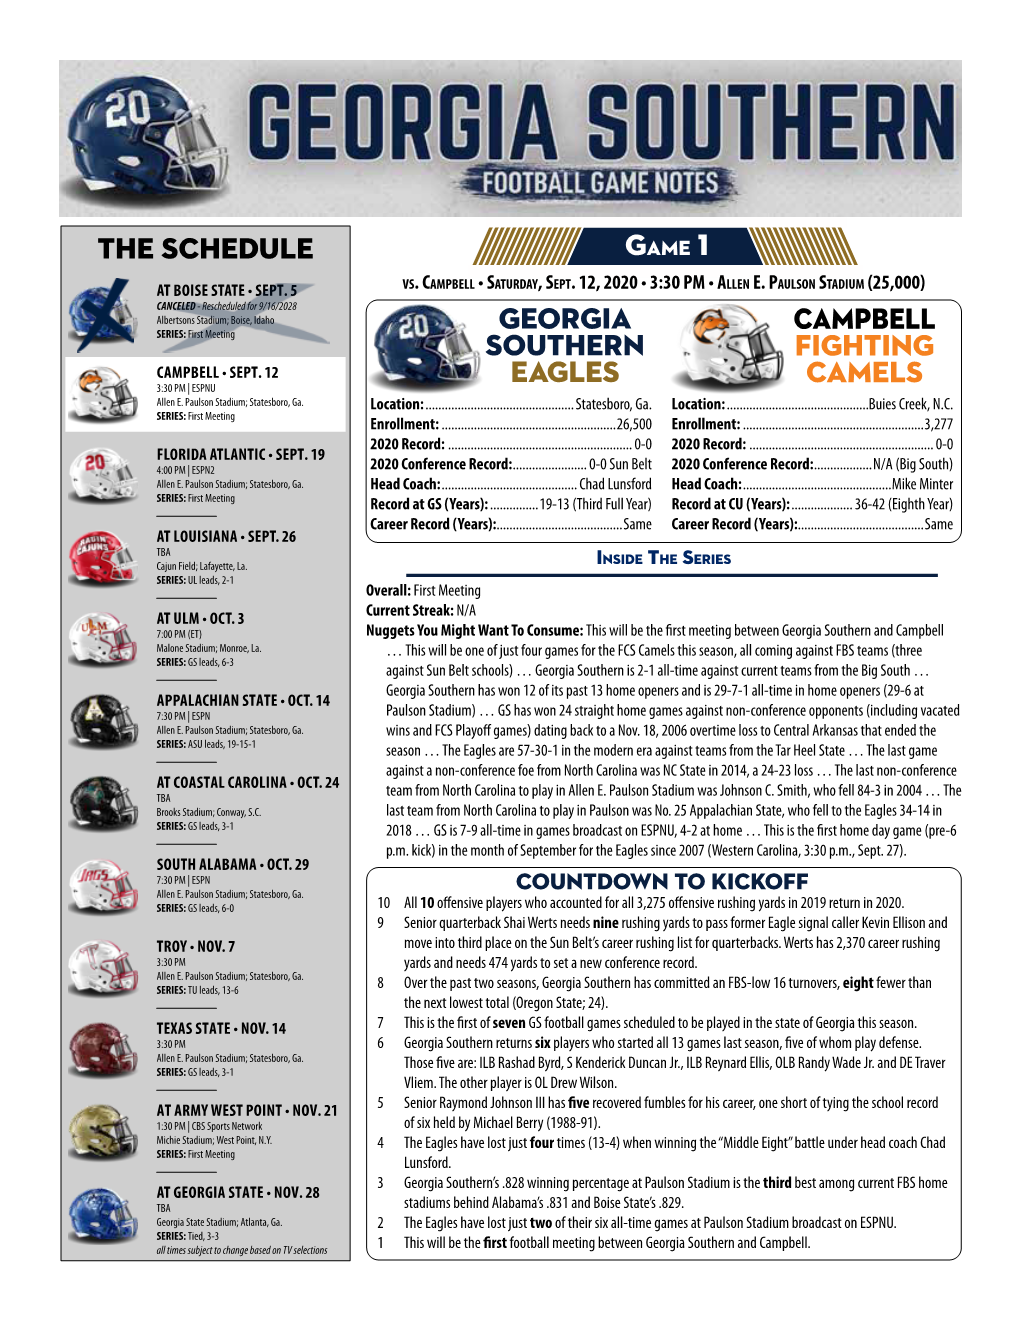 GEORGIA SOUTHERN EAGLES CAMPBELL Fighting CAMELS